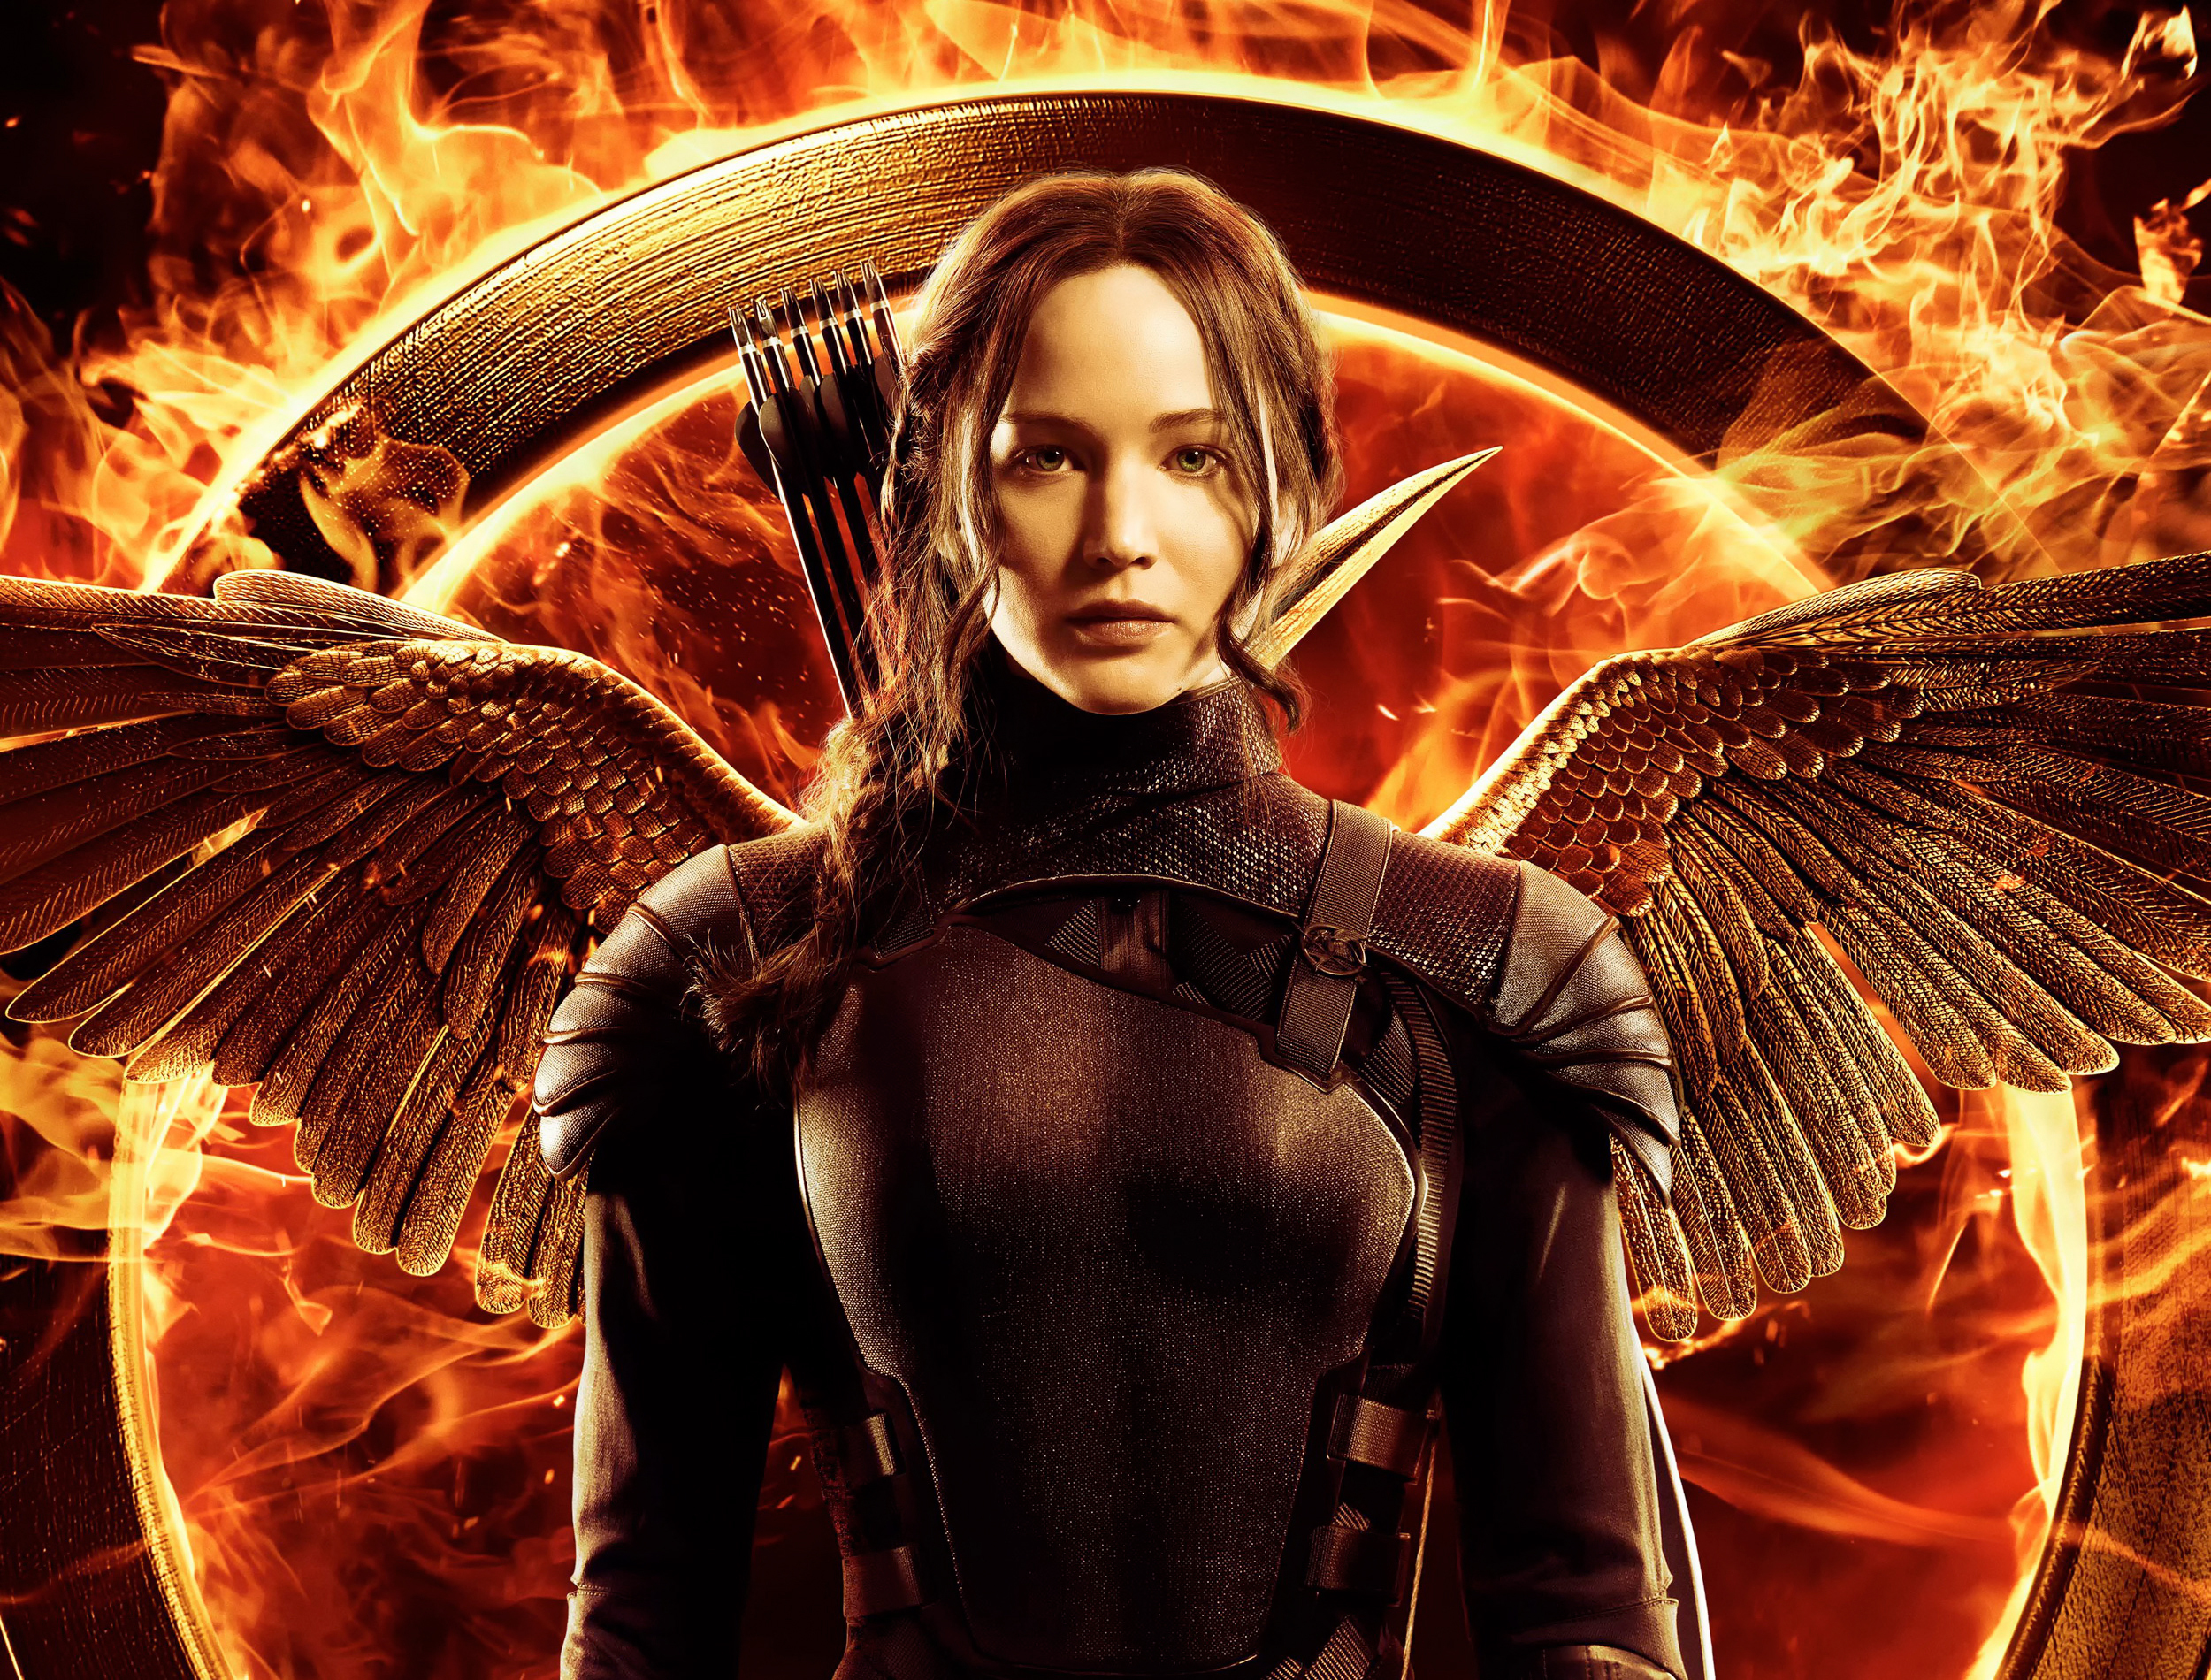 Fire Flame Jennifer Lawrence Katniss Everdeen The Hunger Games The Hunger Games Mockingjay Part 1 Wi 2500x1900